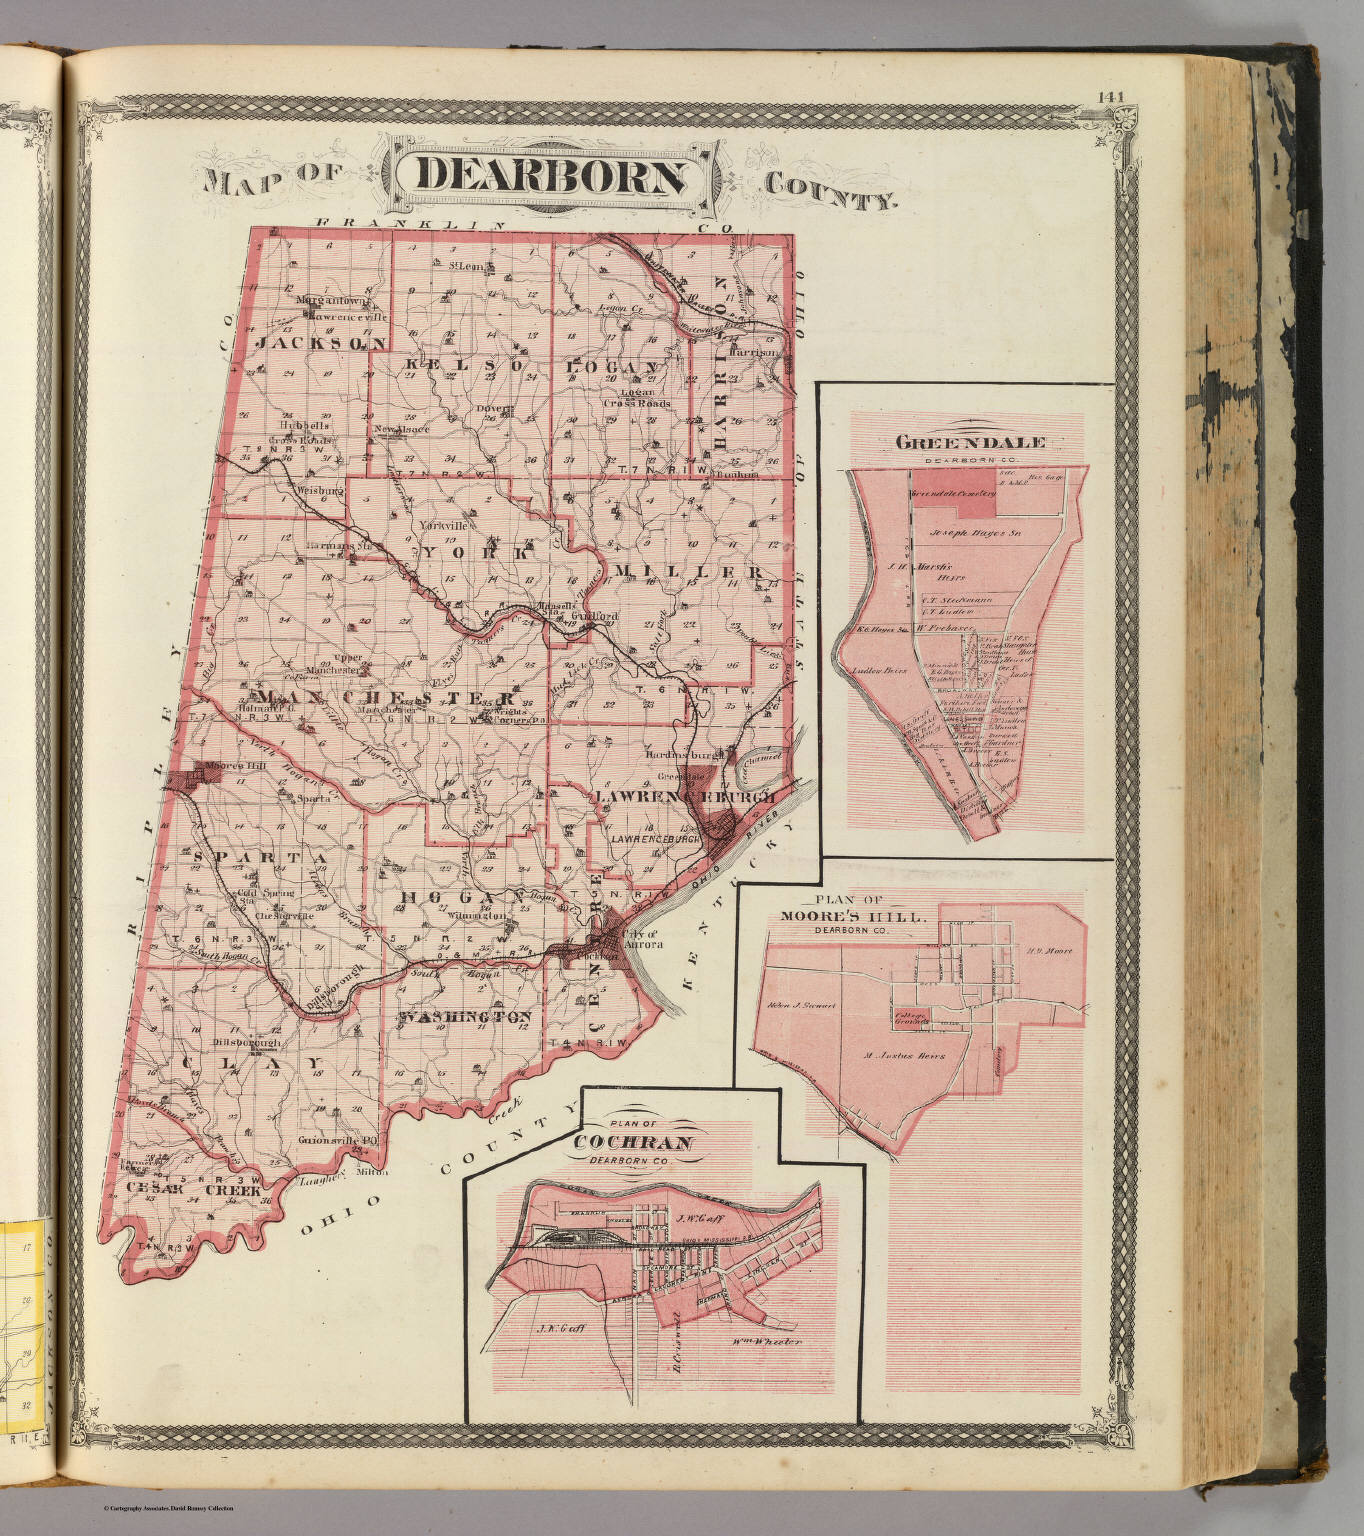 Map Of Dearborn County With Greendale Moore S Hill Cochran